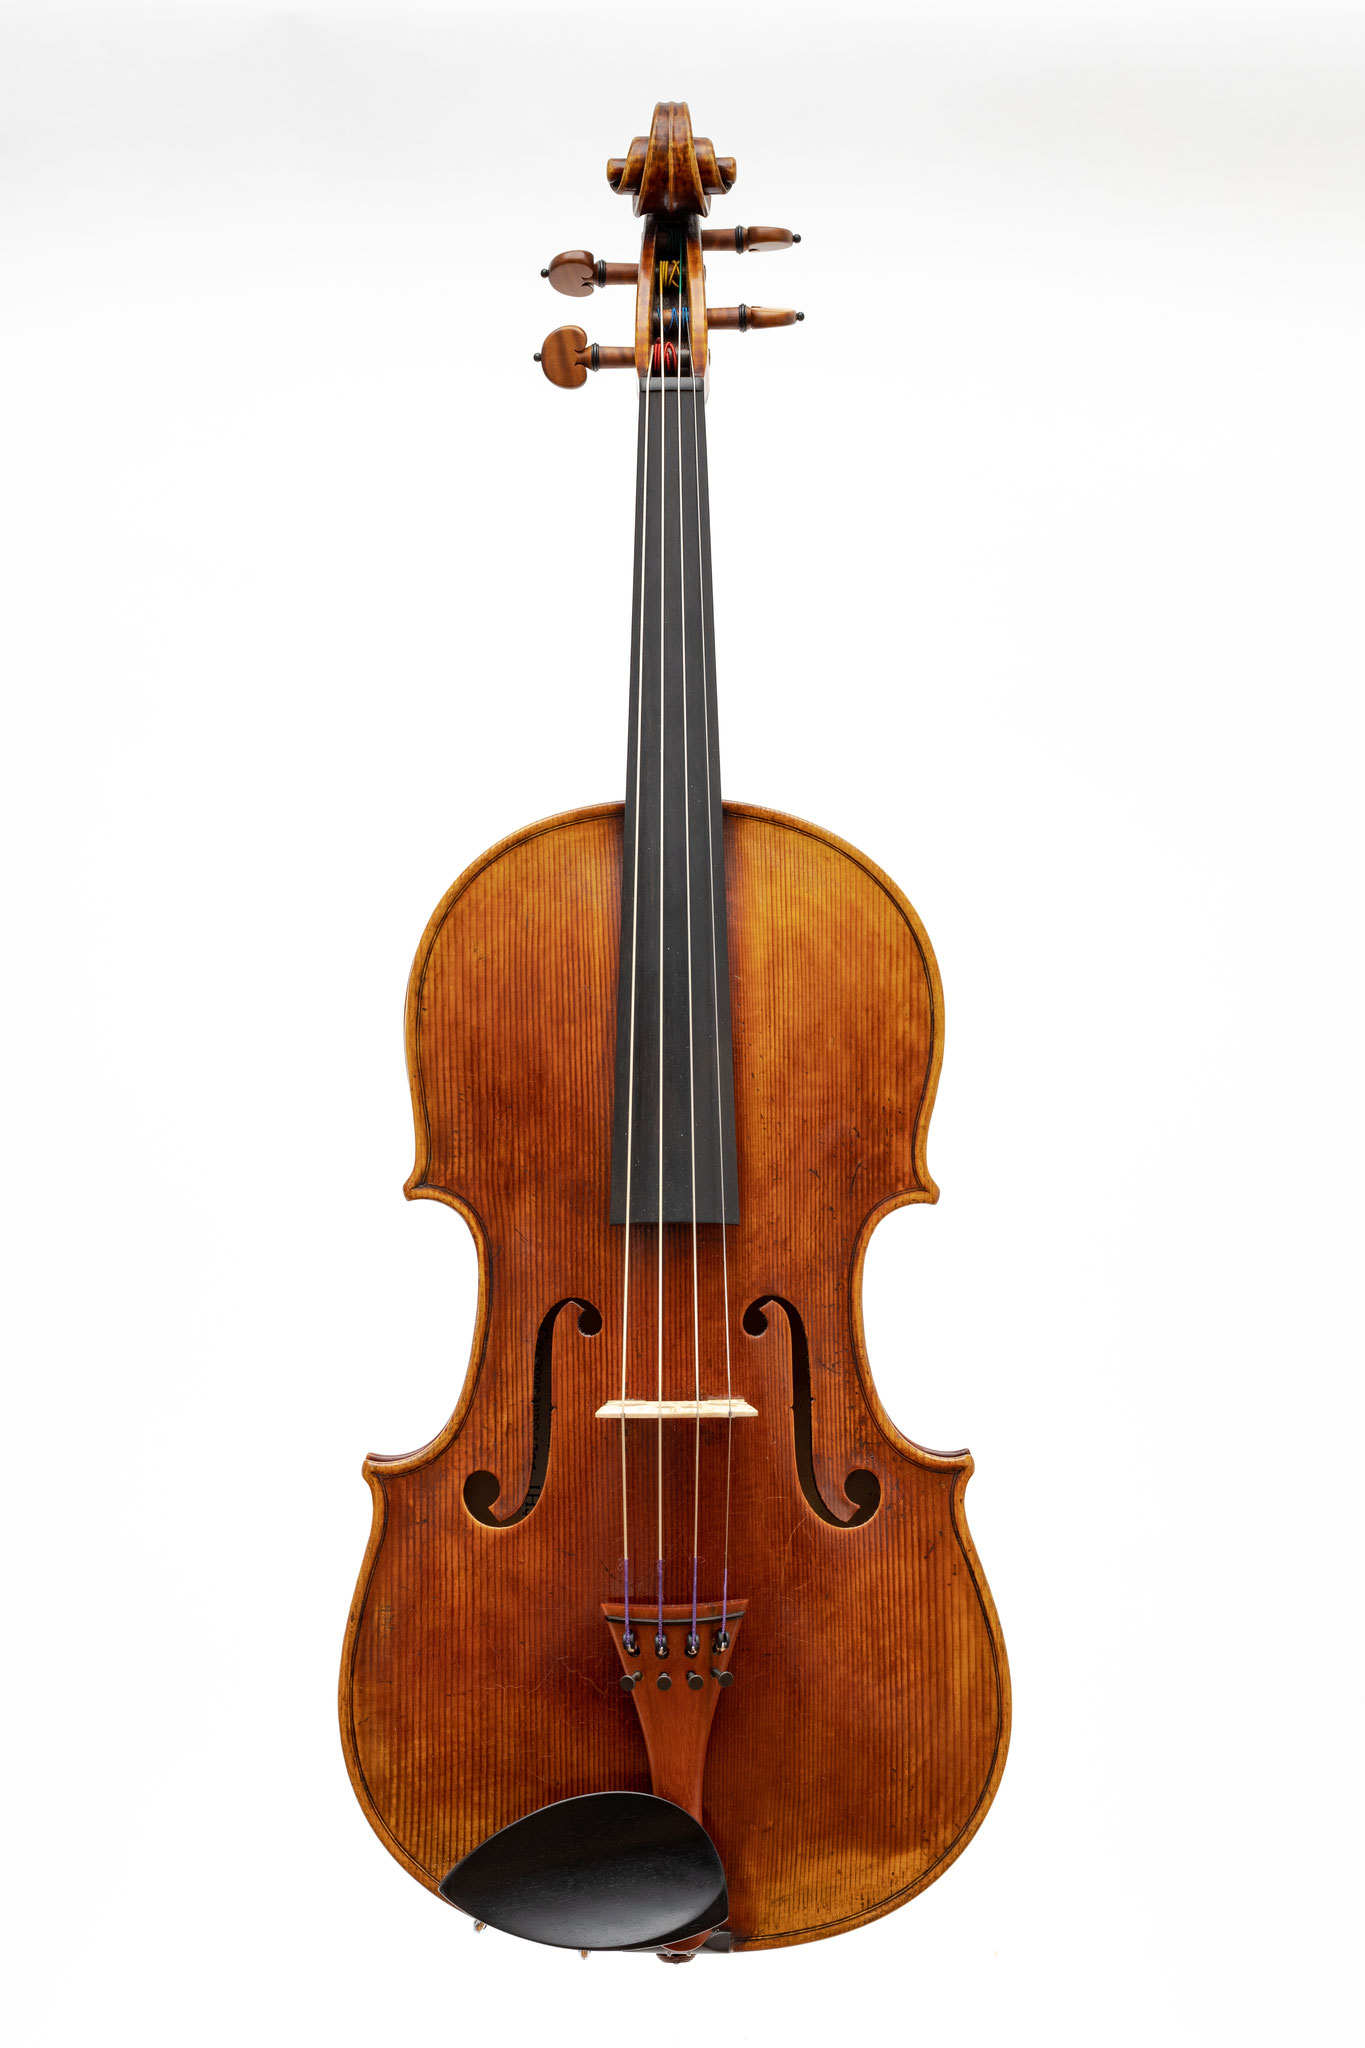  Viola in the style of G.Guarneri del Gesù (2019/CH), Photo: VDB Photography